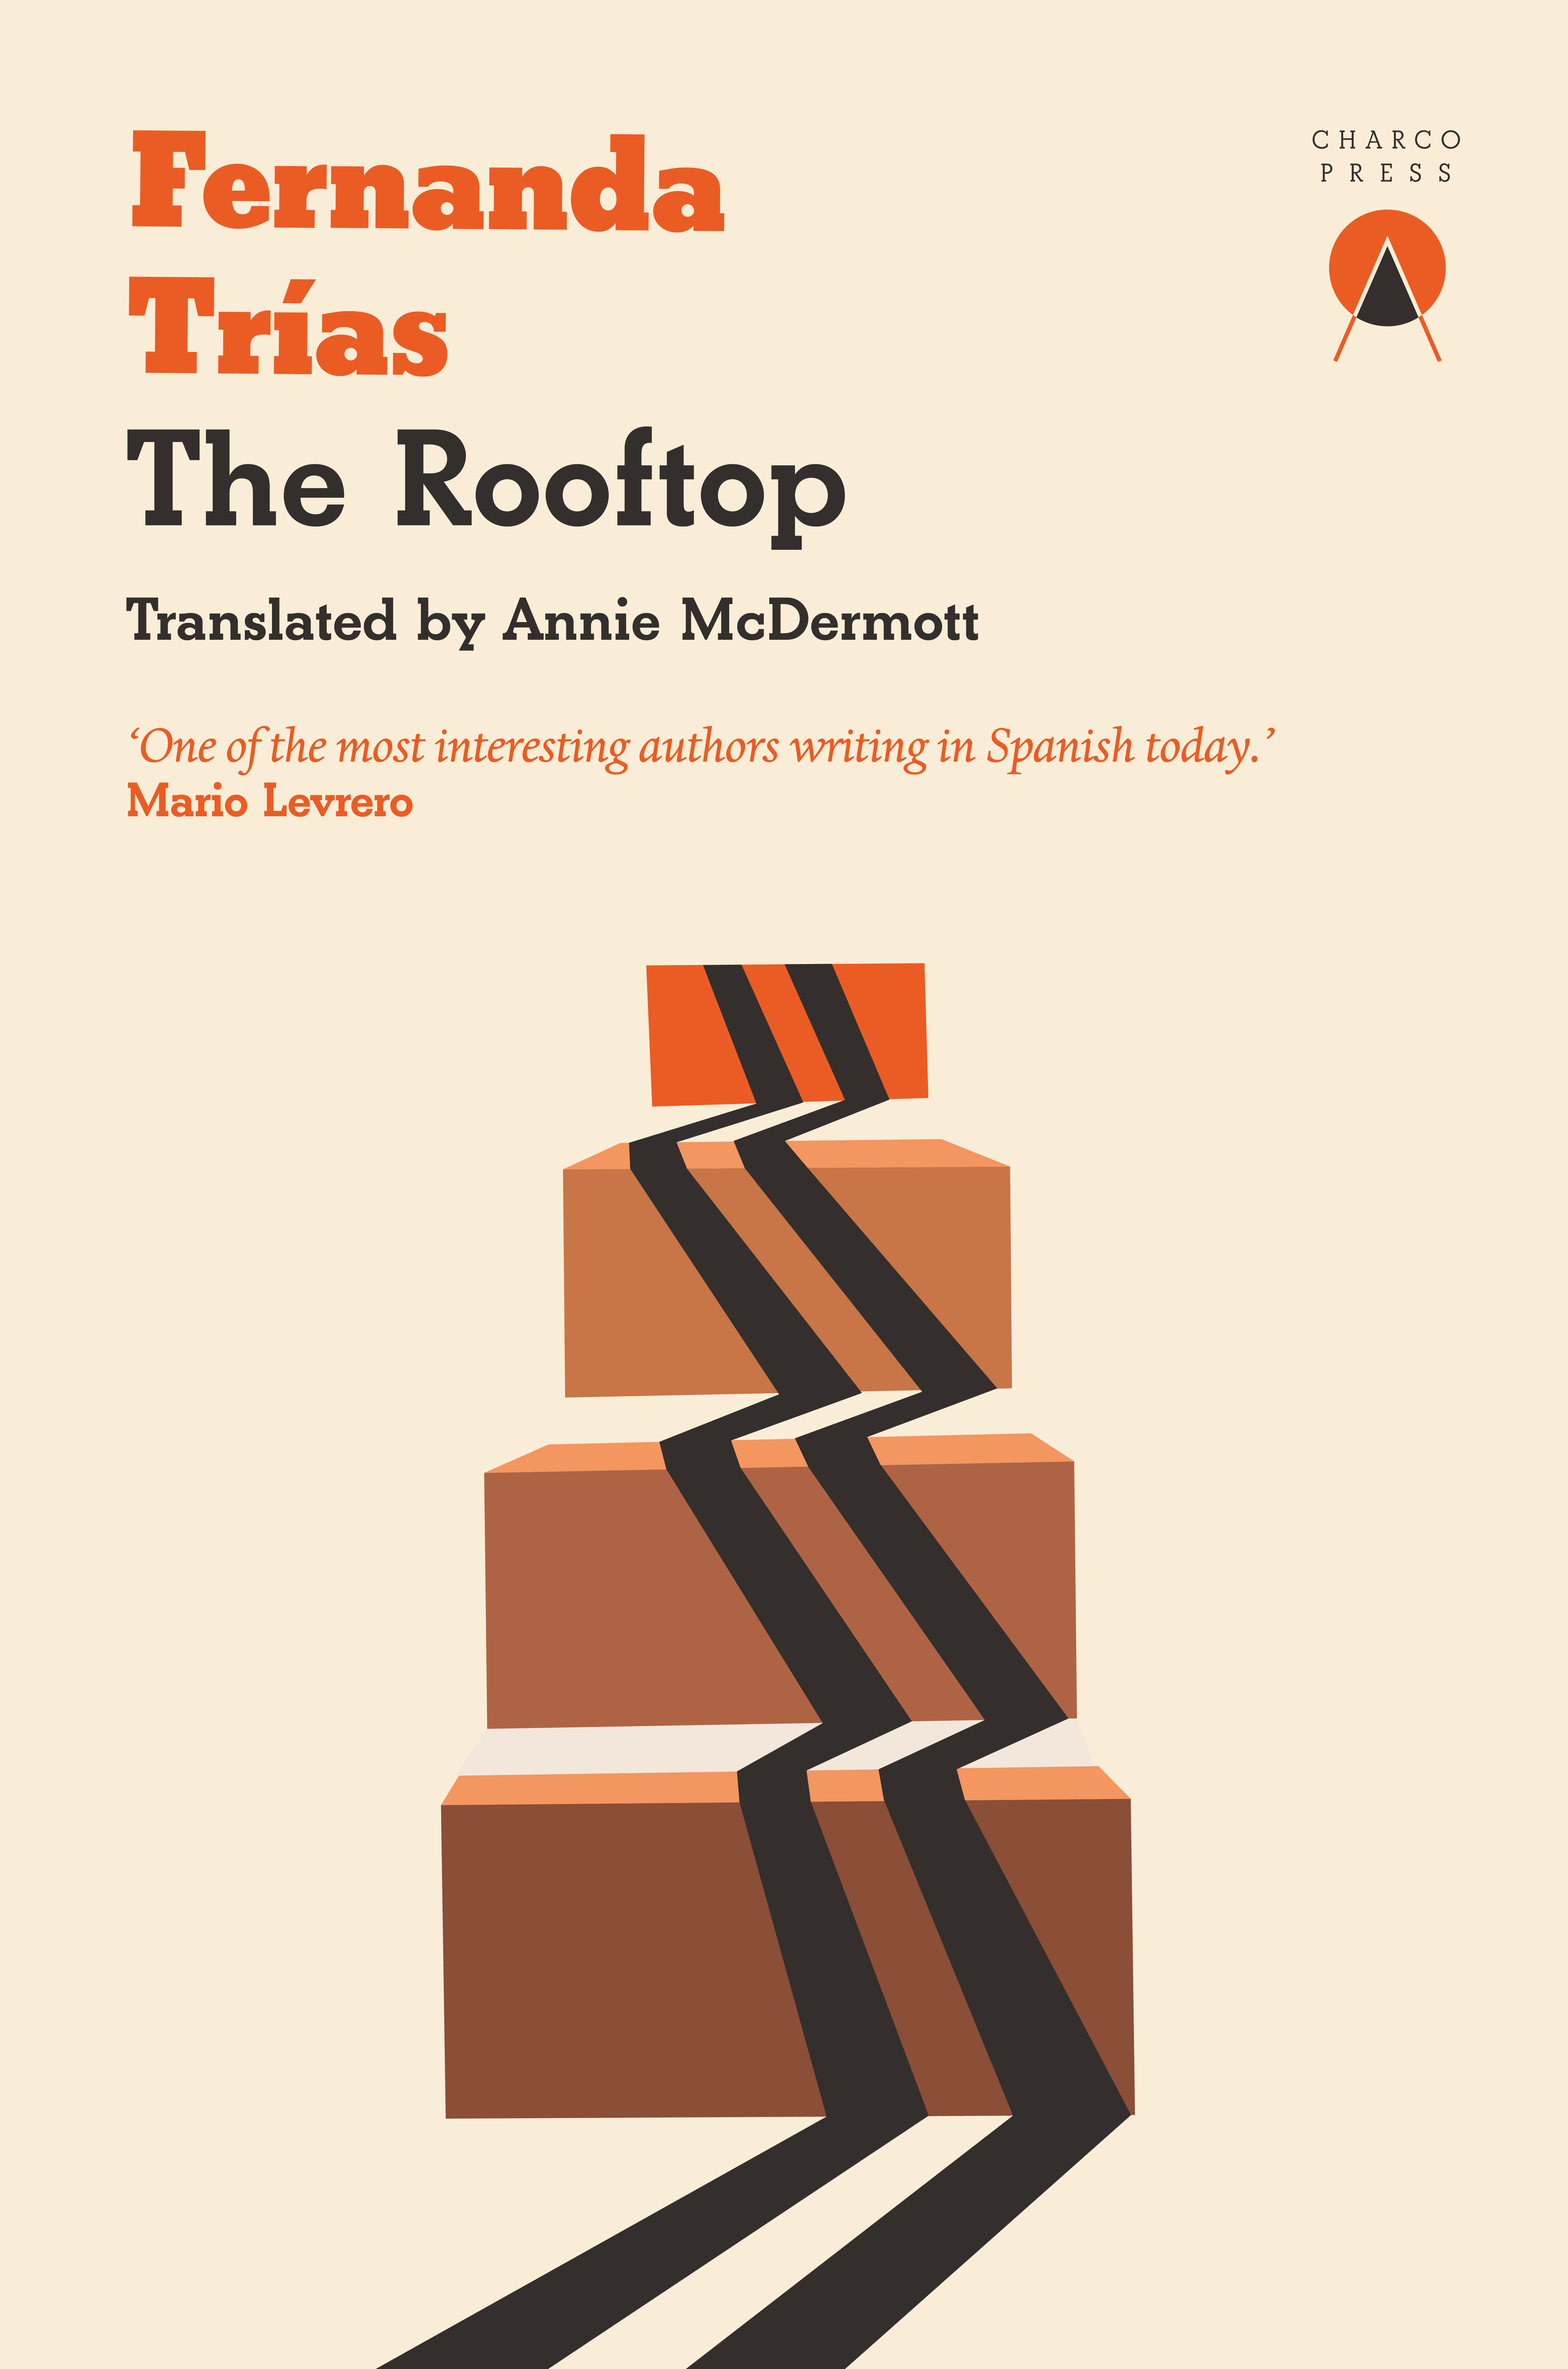 The Rooftop book cover